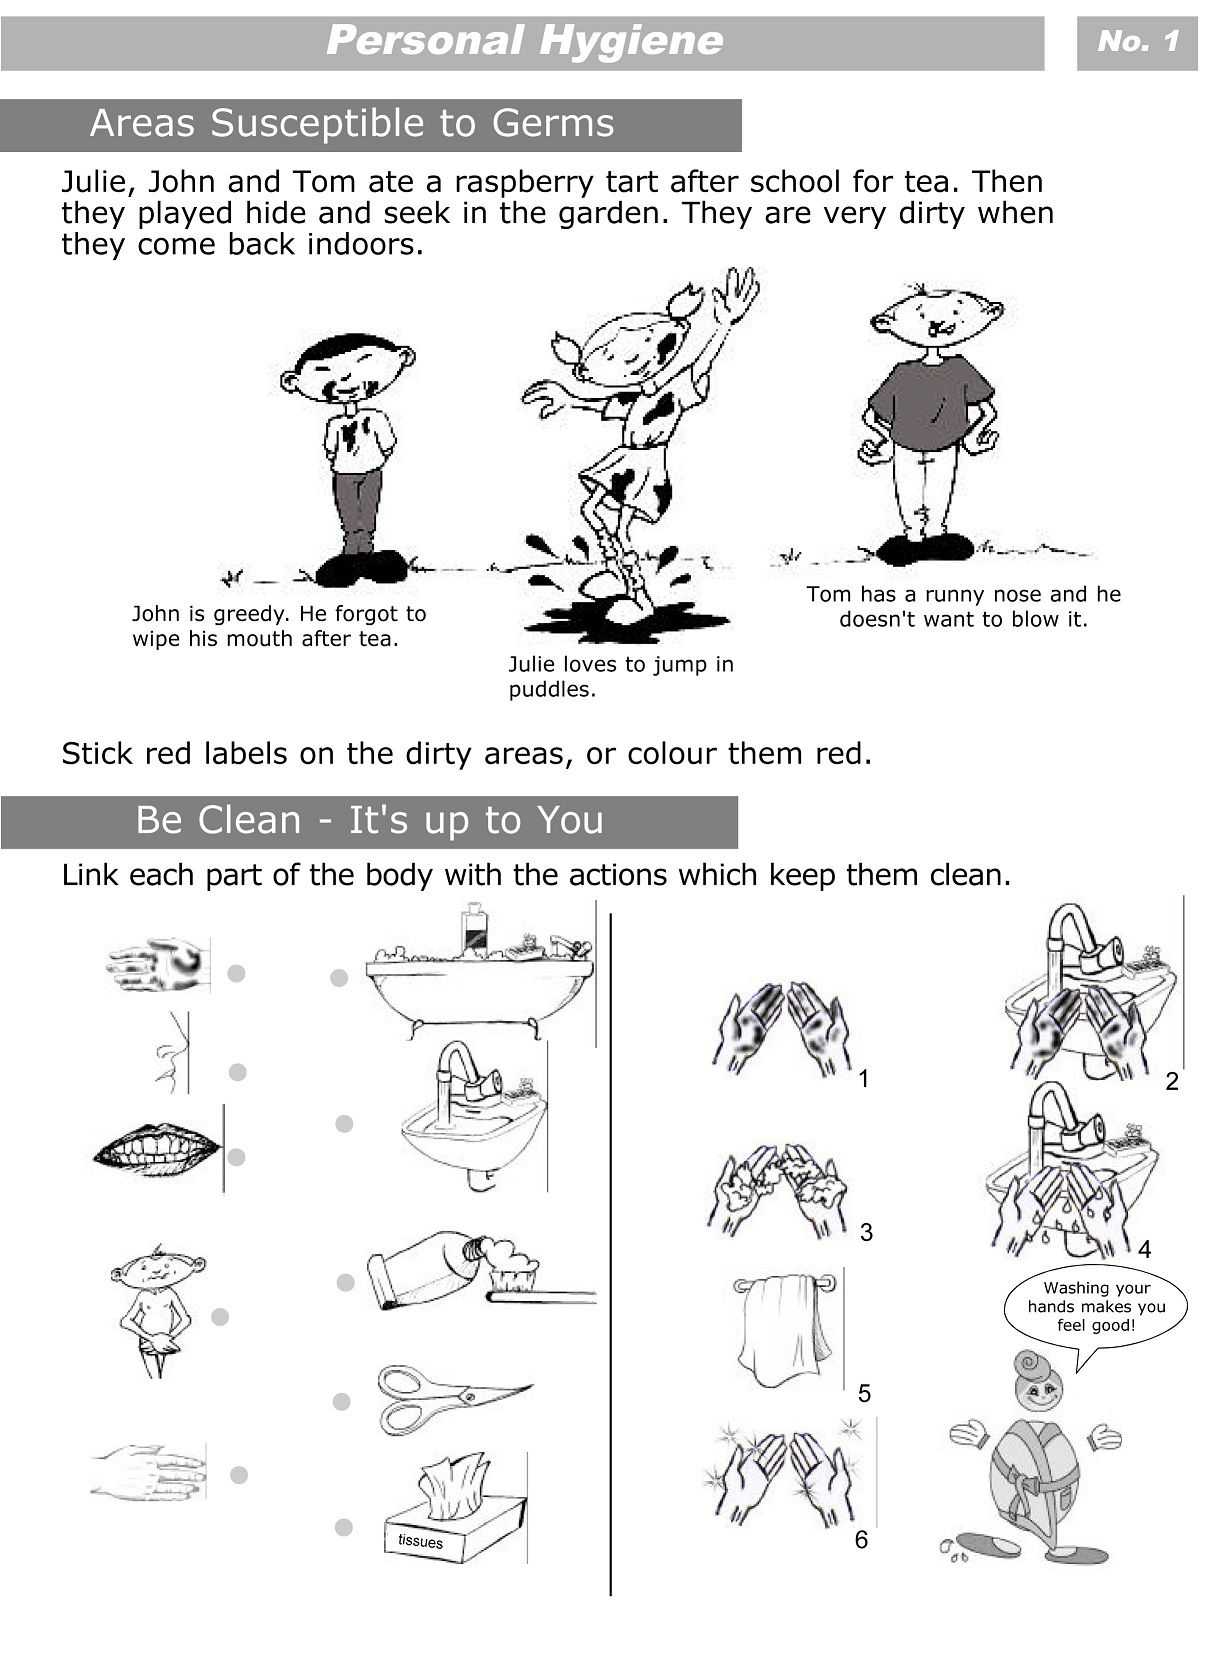 Anxiety Worksheets for Kids with Personal Hygiene Worksheets for Kids 1 …